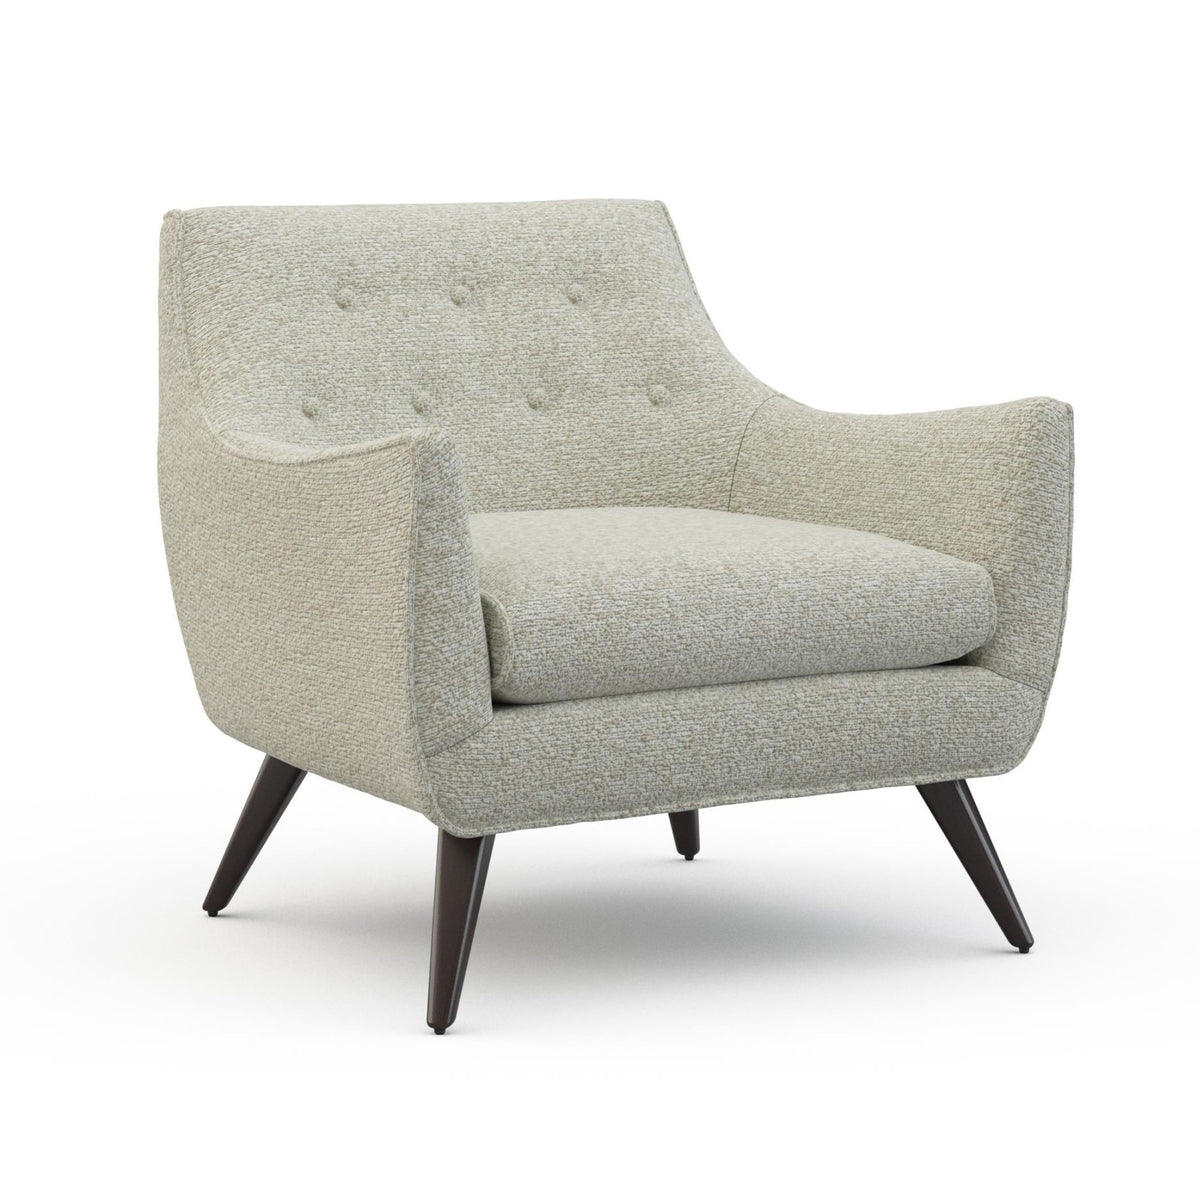 Precedent Marley Chair 4168-C1 in Cleo Angora